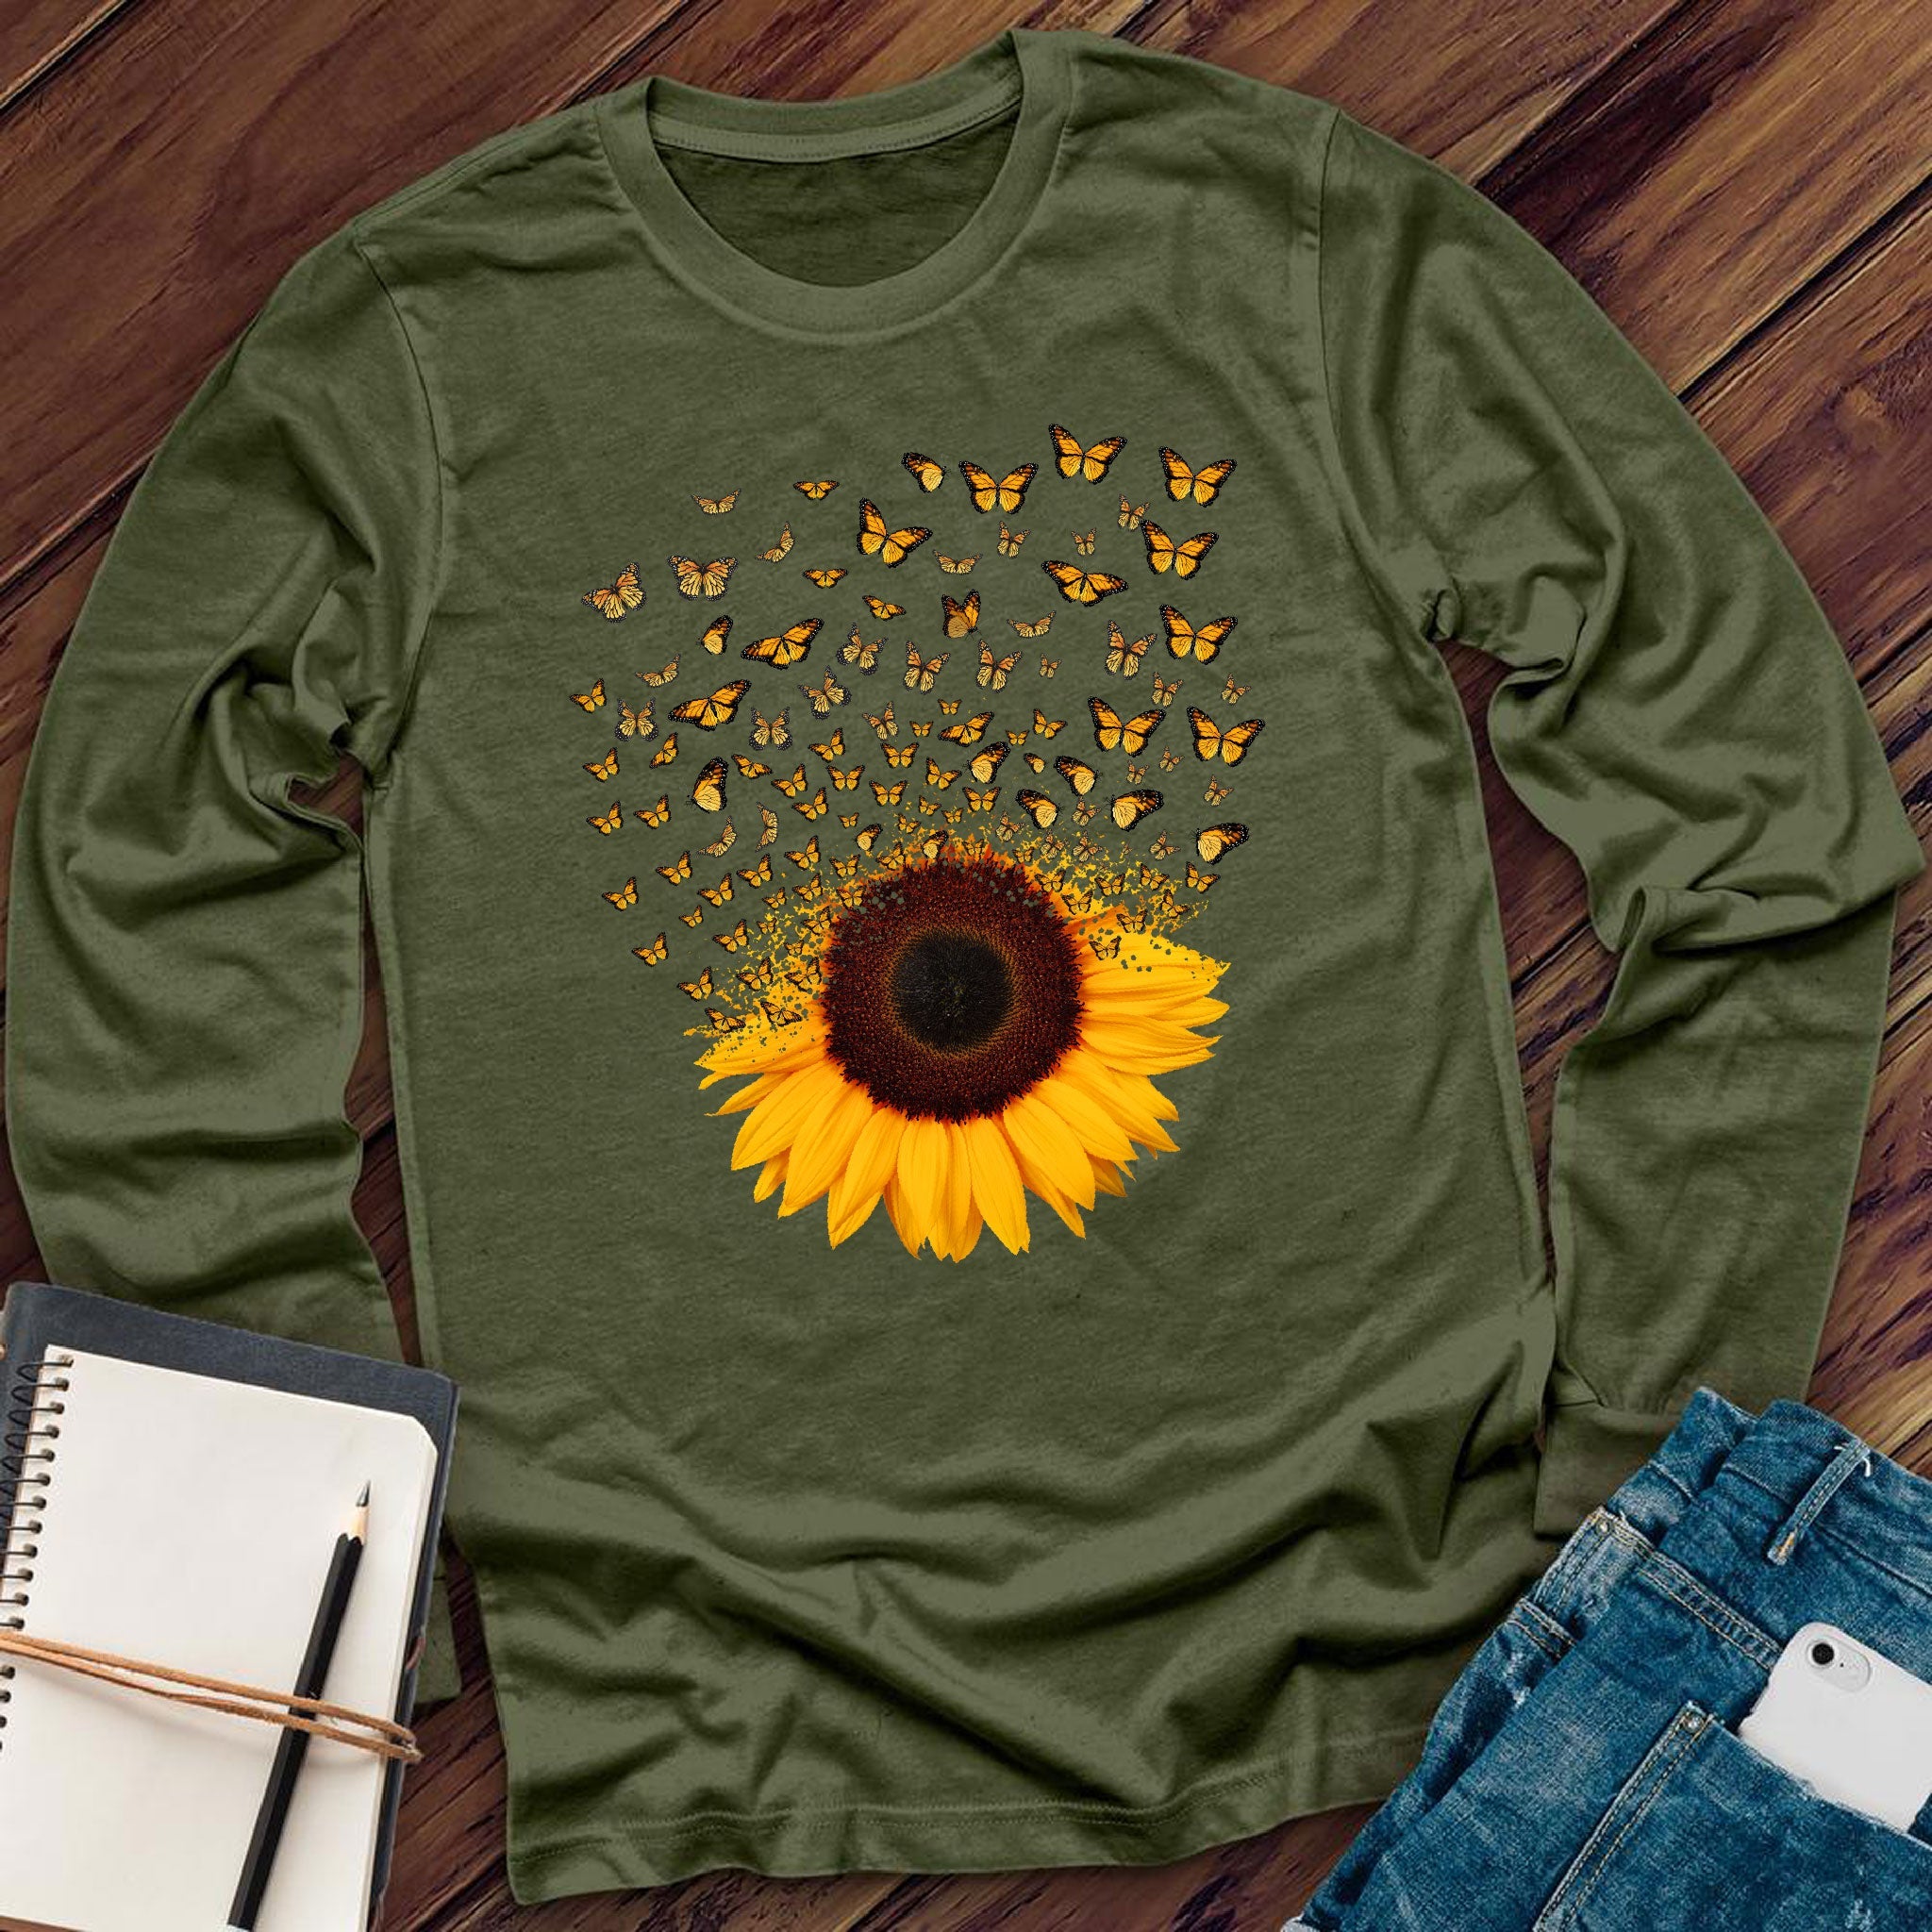 Adorable Butterfly Sunflower Long Sleeve - Love Tees